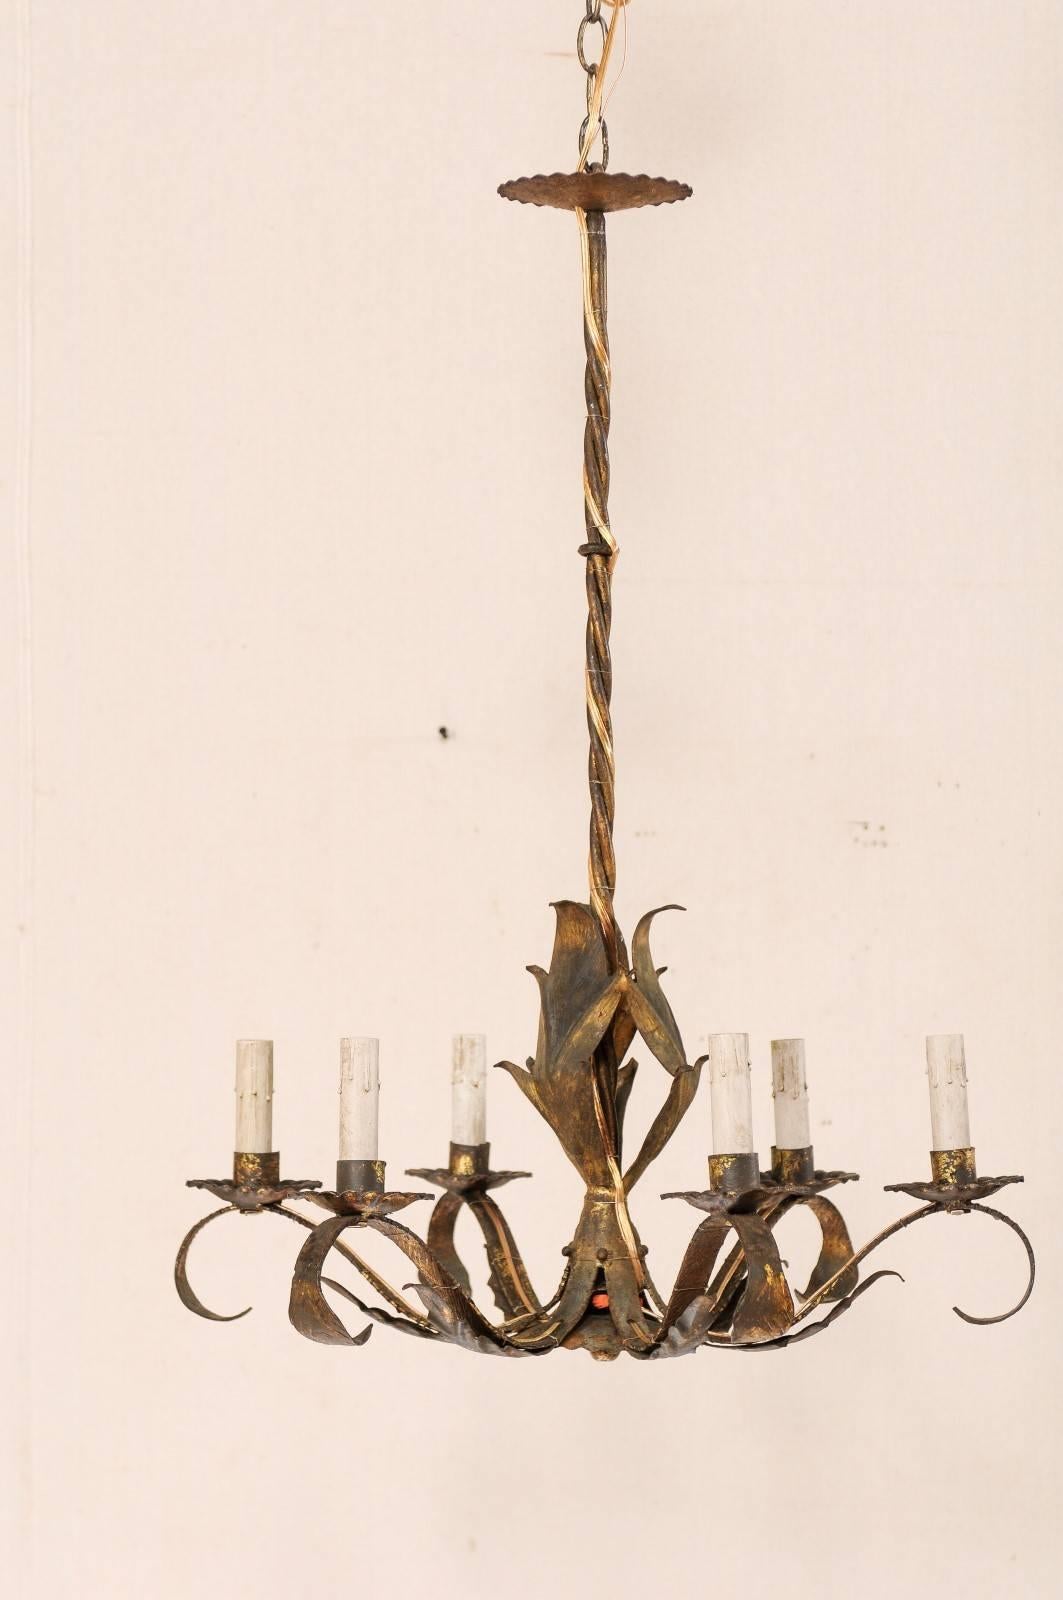 A French Mid-Century Modern six-light chandelier. This French chandelier has a modern design featuring a central column of metal leaves, gathered at the center, and flow outward at the bottom onto the six scrolling arms. Each arm has an s-scrolled